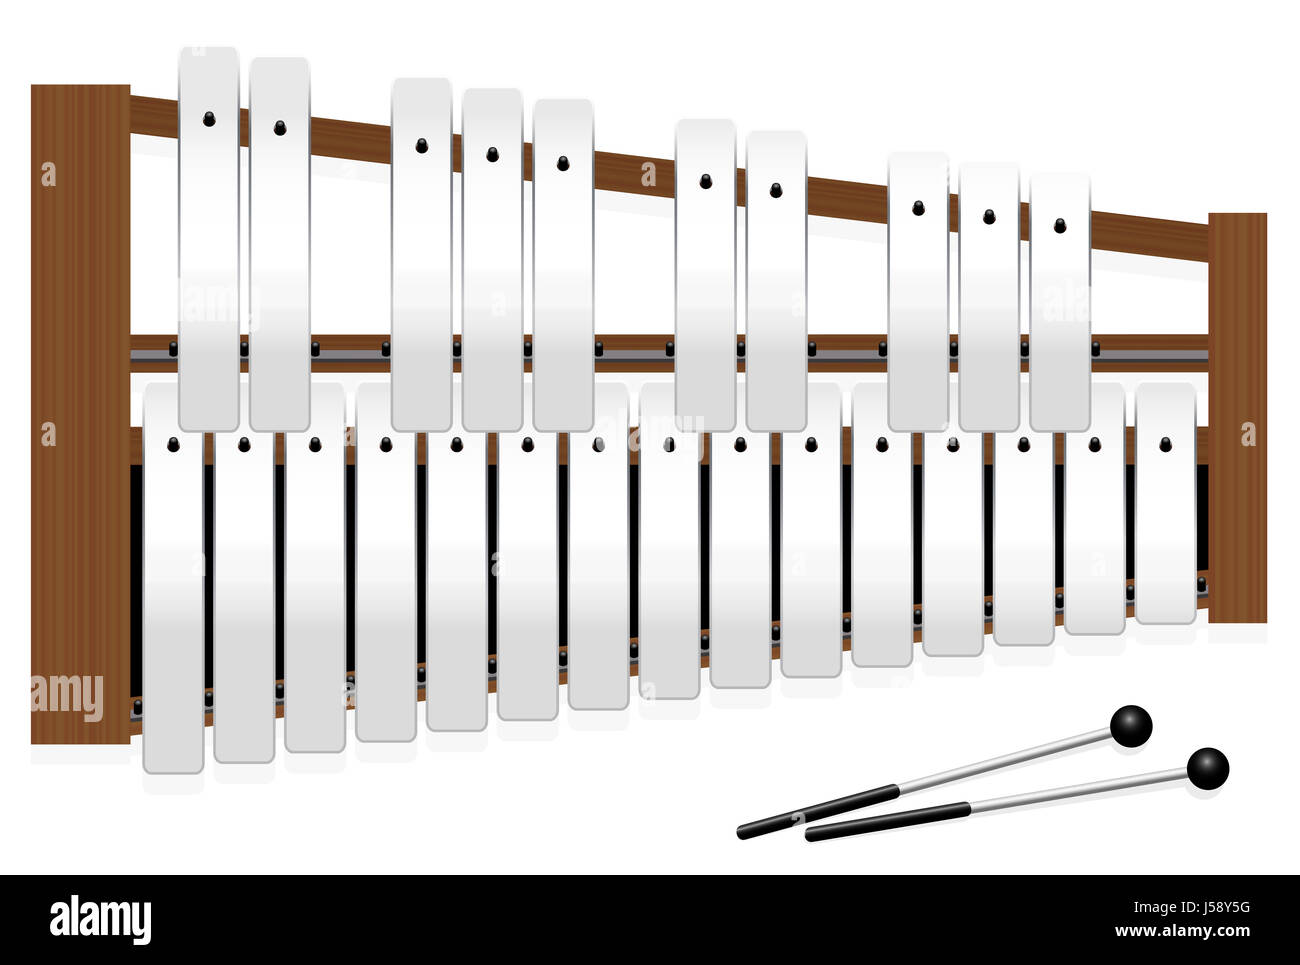 Metallophone with metal bars - top view - three octaves in c major with fifteen whole tones and ten halftones - plus two percussion mallets. Stock Photo